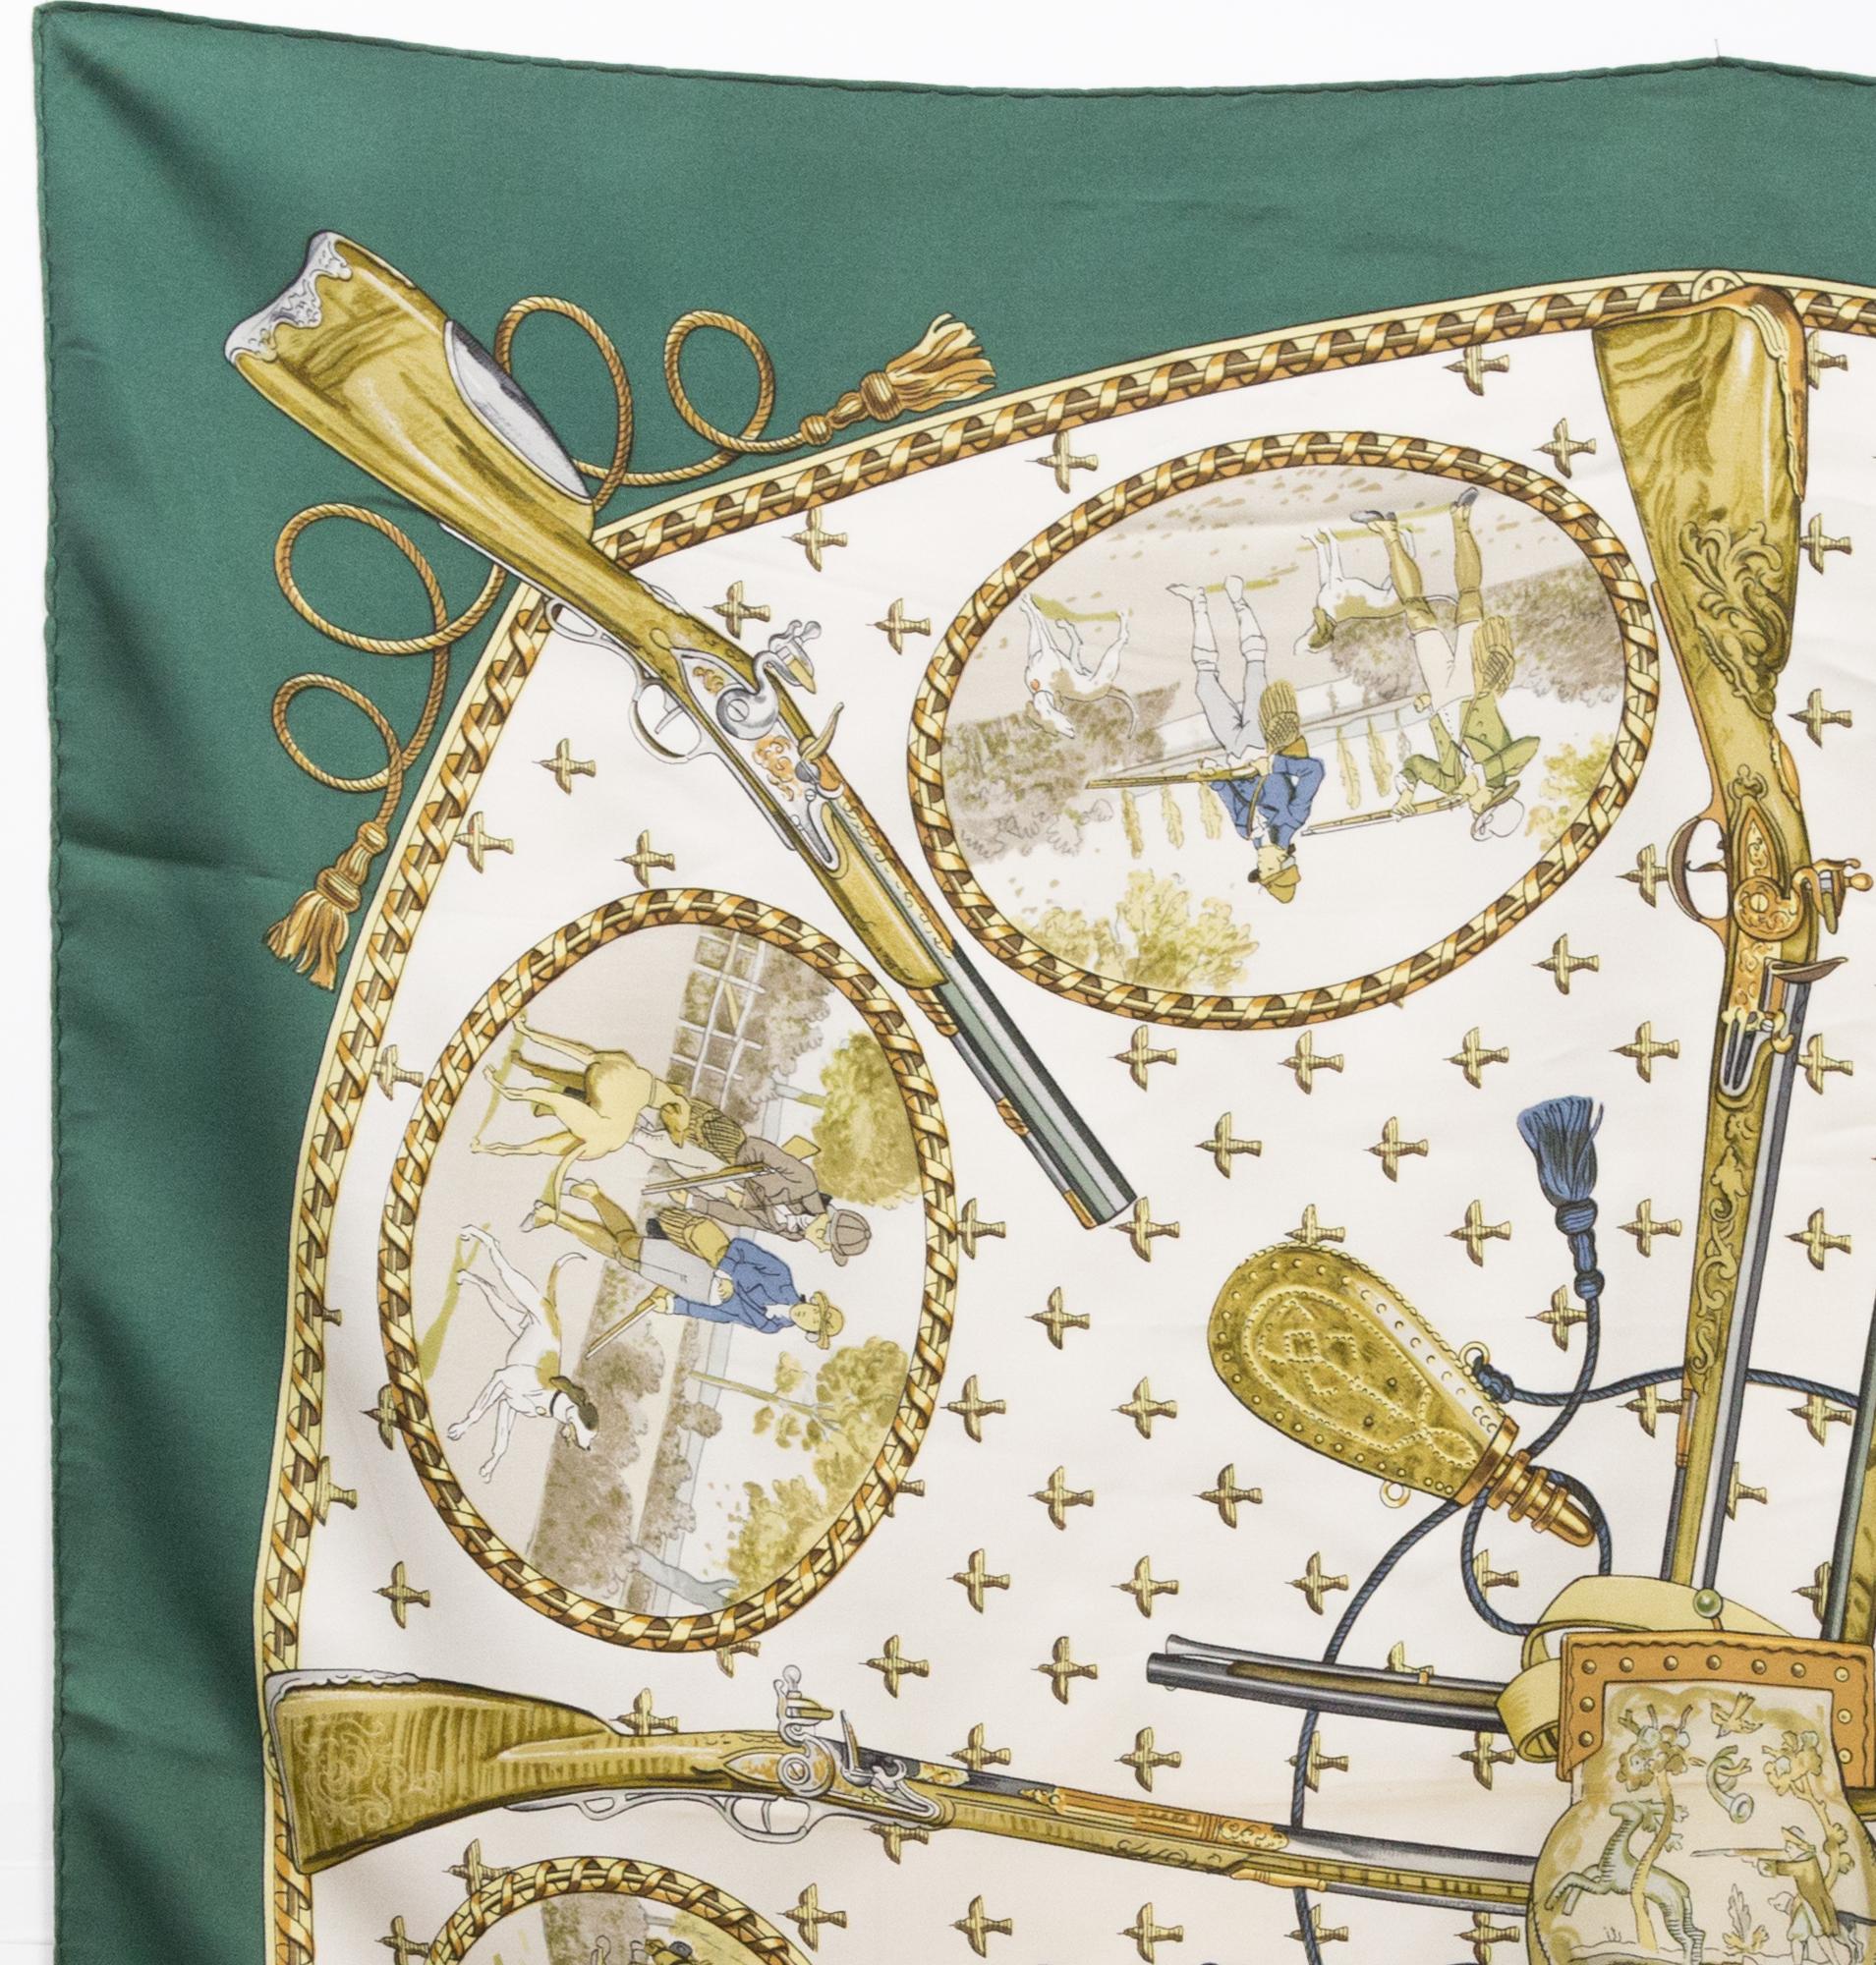 Hermès “La Chasse A Tir” by Philippe Ledoux silk scarf featuring a green border, a Hermès signature. 
Circa 1972
In good vintage condition. Made in France.
35,4in. (90cm)  X 35,4in. (90cm)
We guarantee you will receive this  iconic item as described